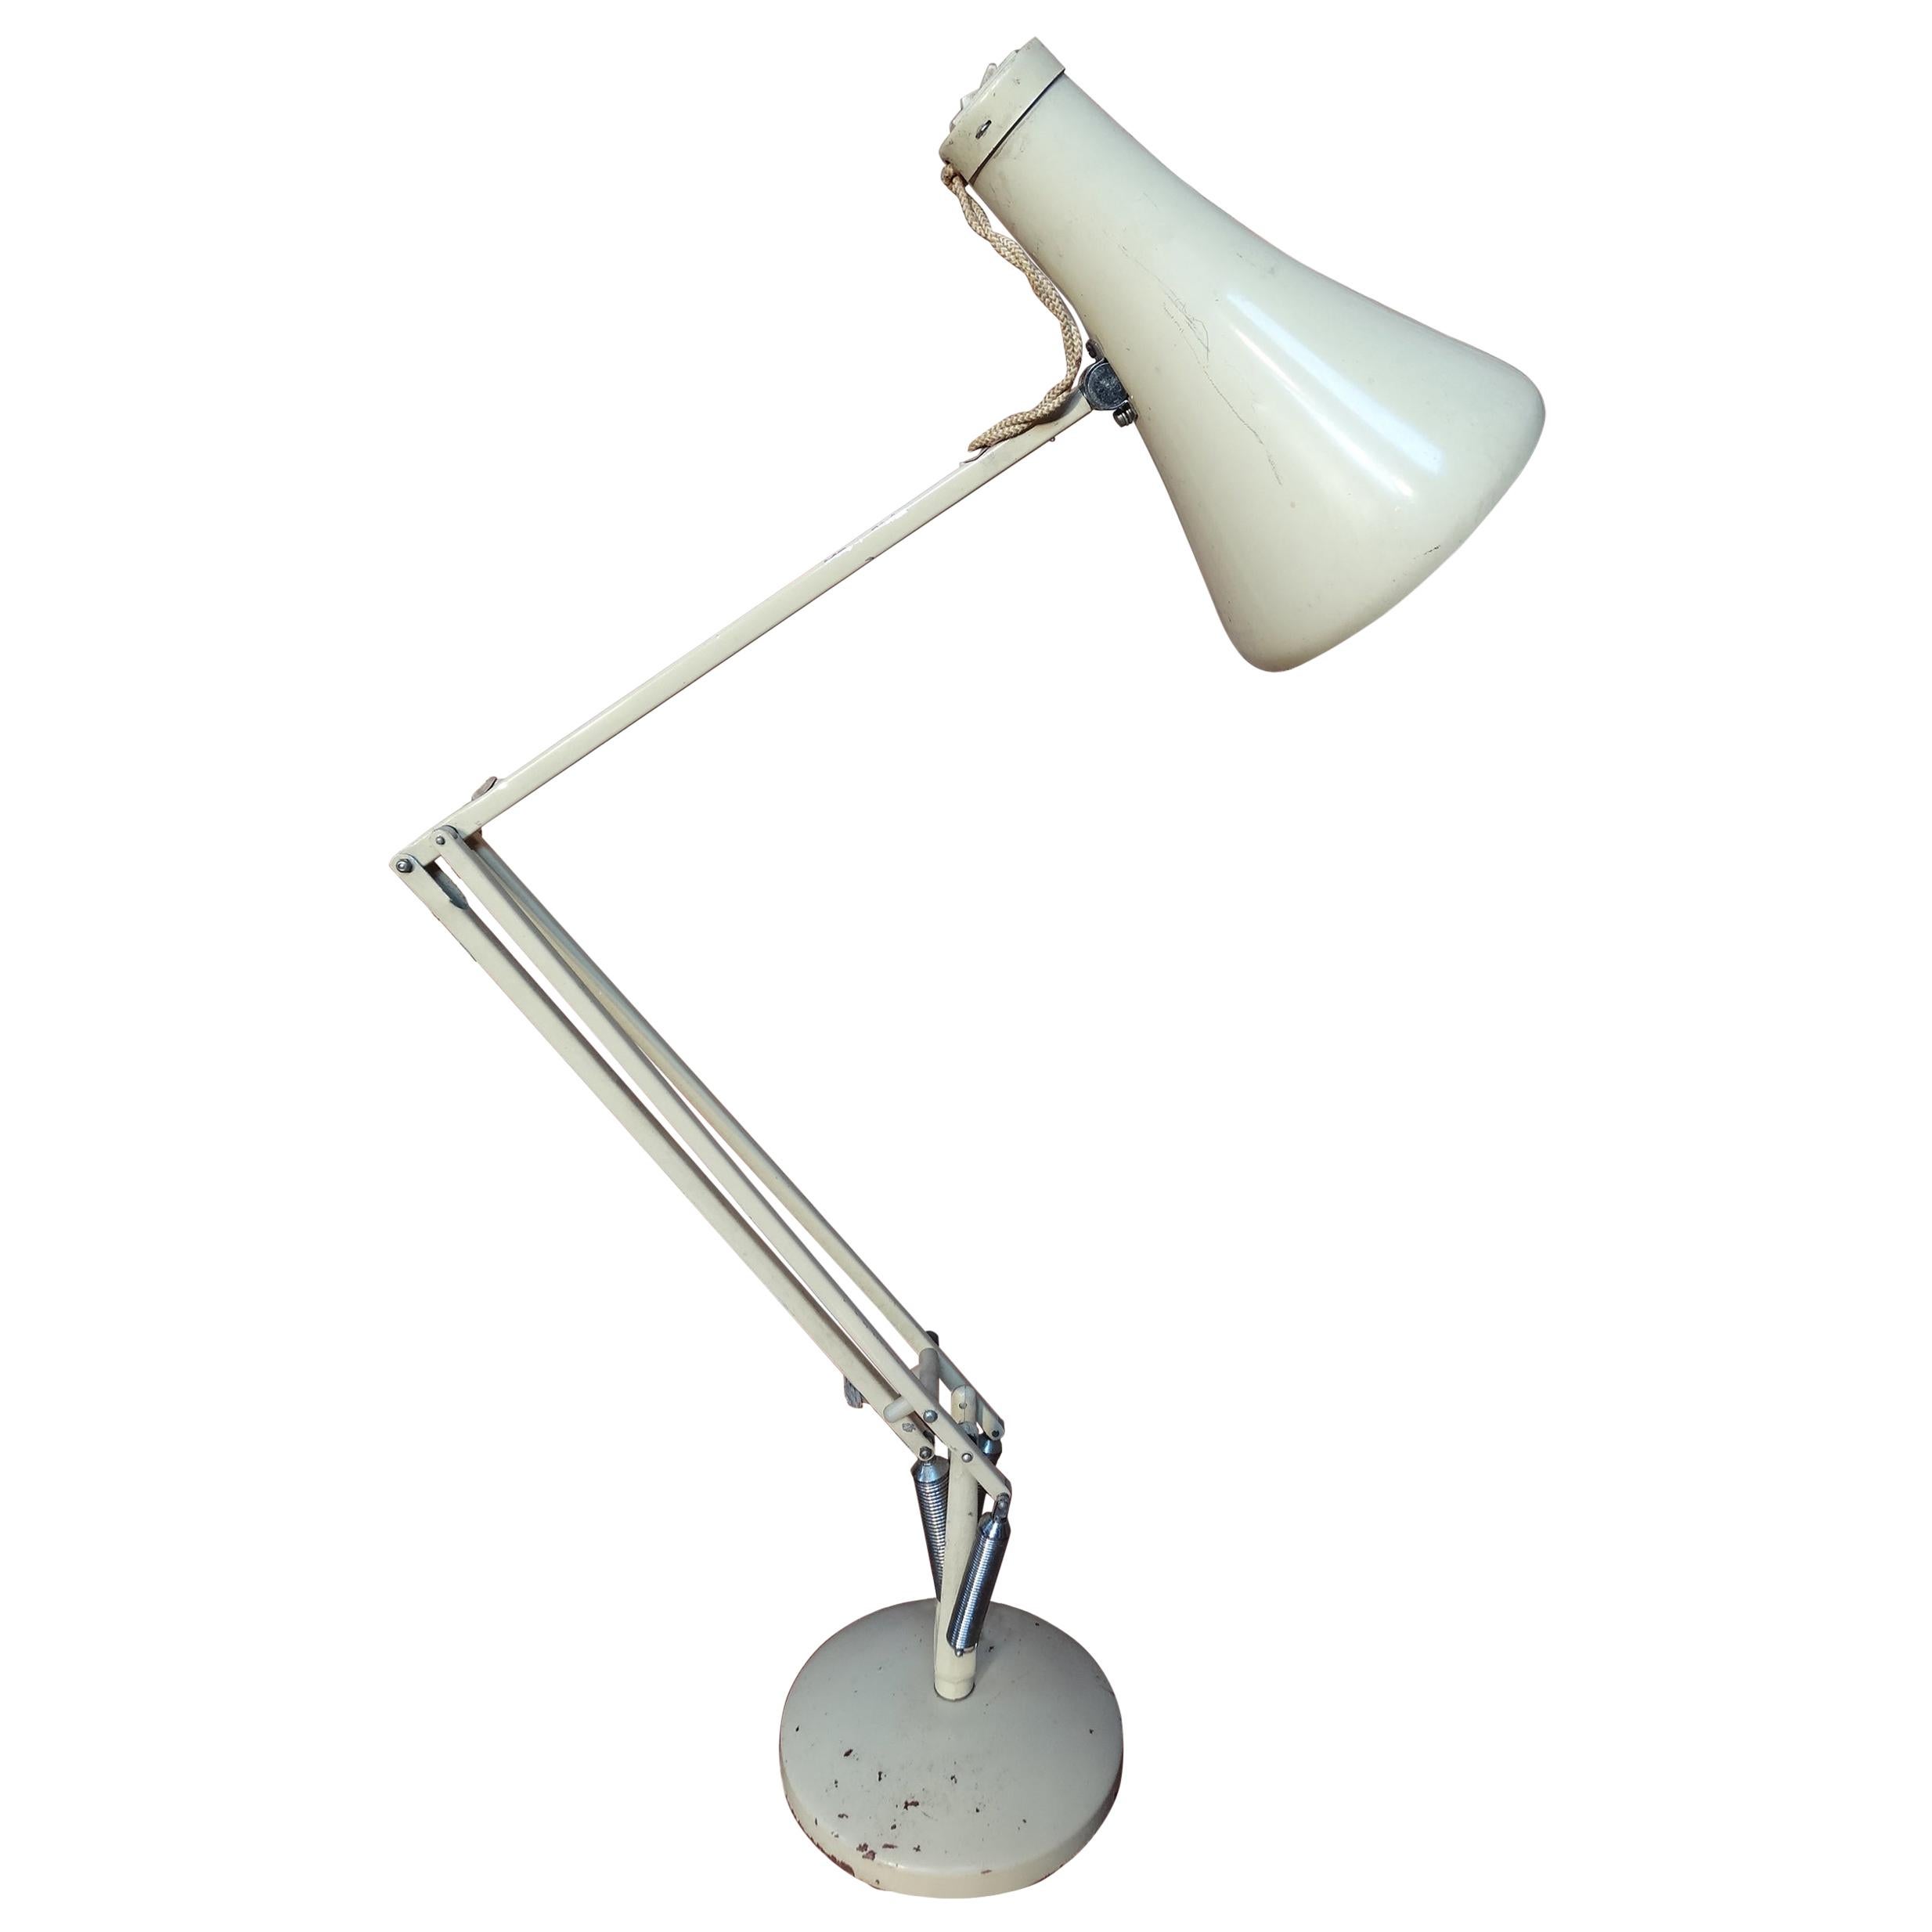 Early Off White Anglepoise Lamp Designed by George Carwardine for Herbert Terry